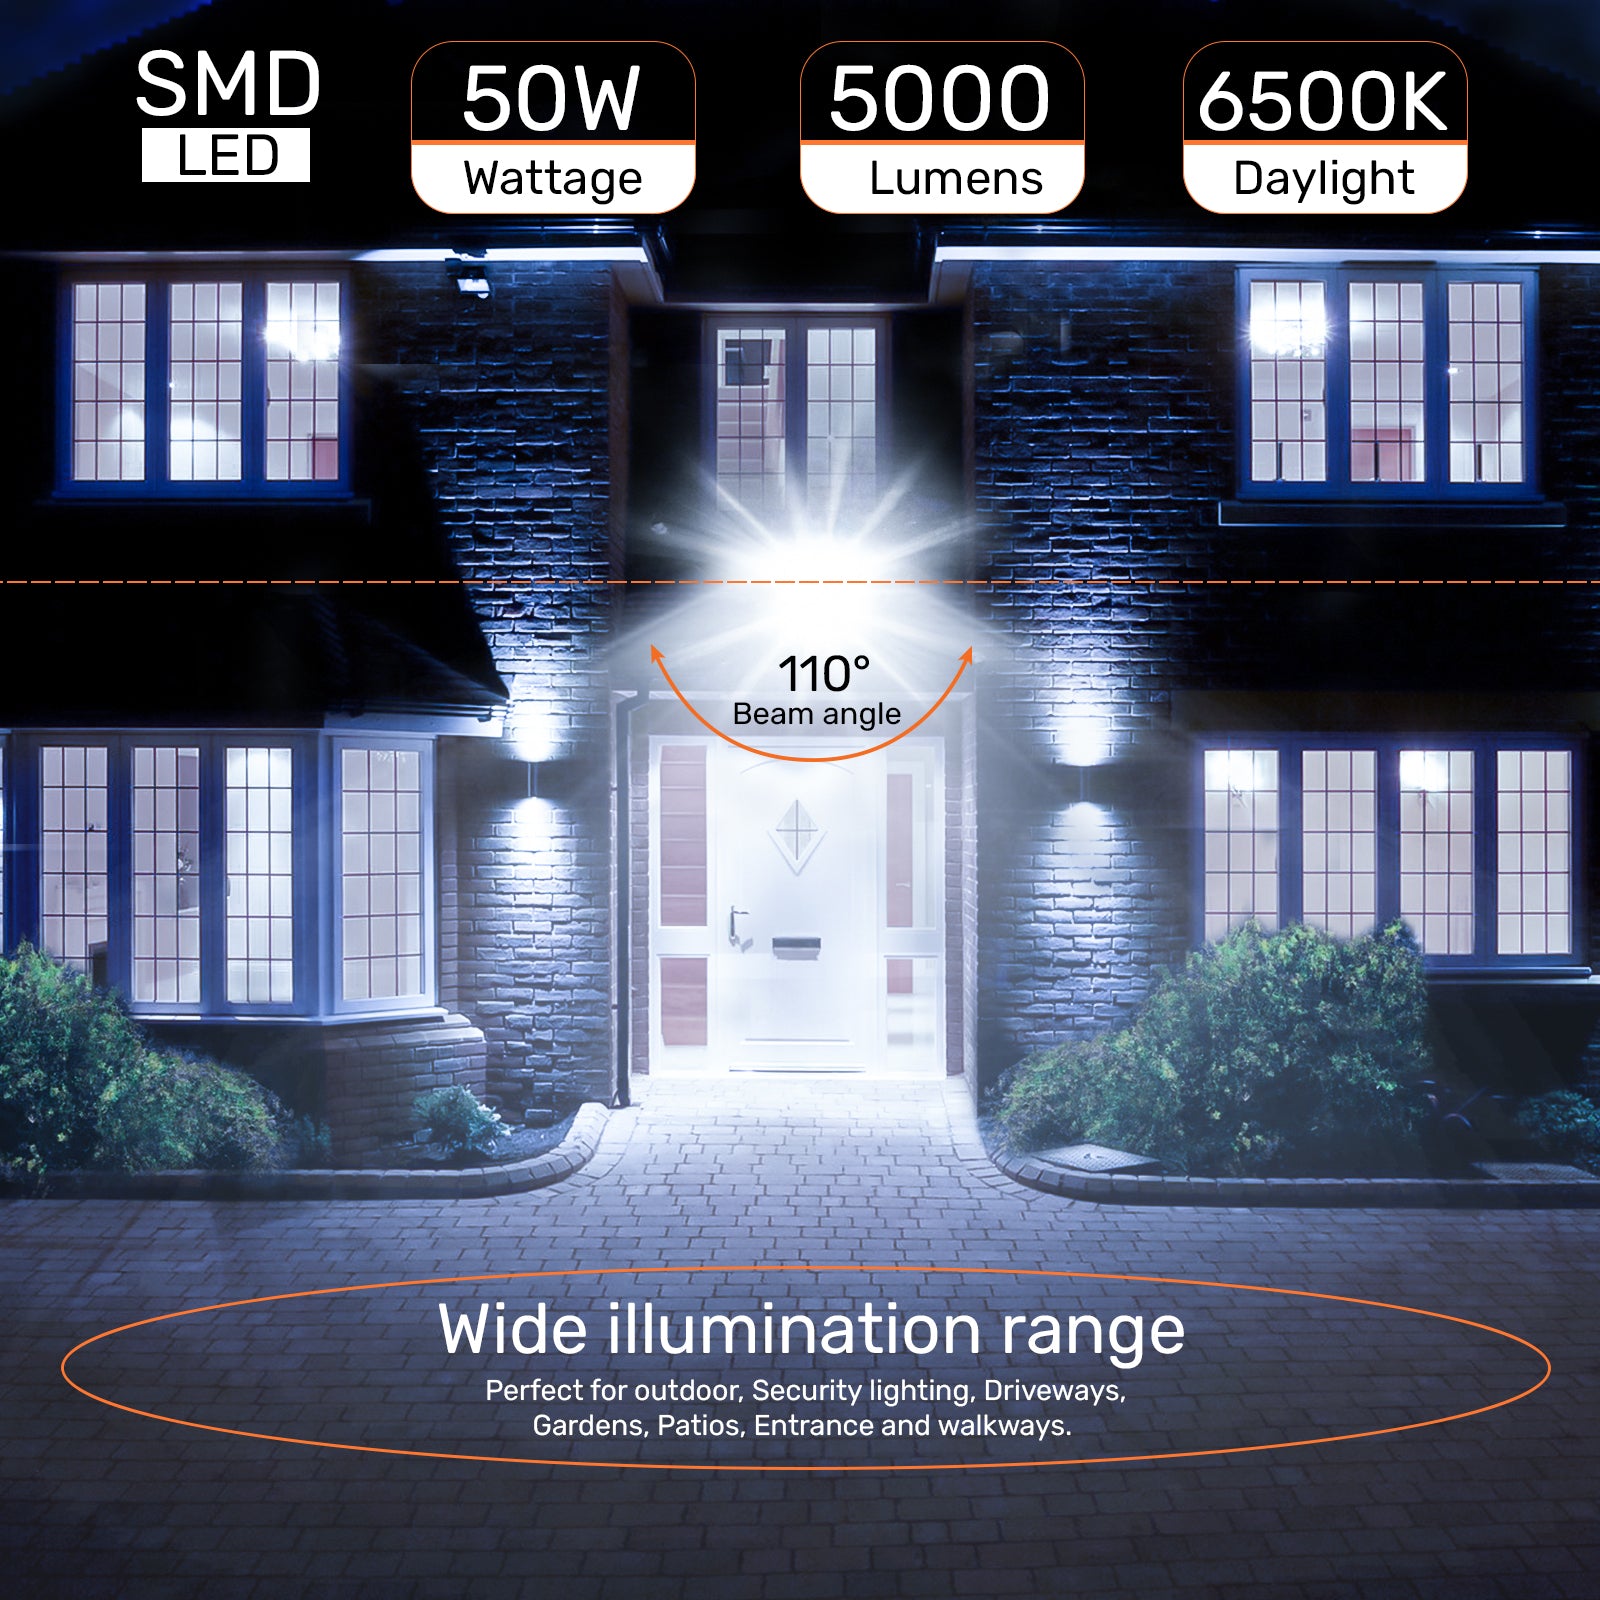 50W, LED Floodlights, 5000 Lumens, 6500K Day Light, Non-Dimmable Spotlights